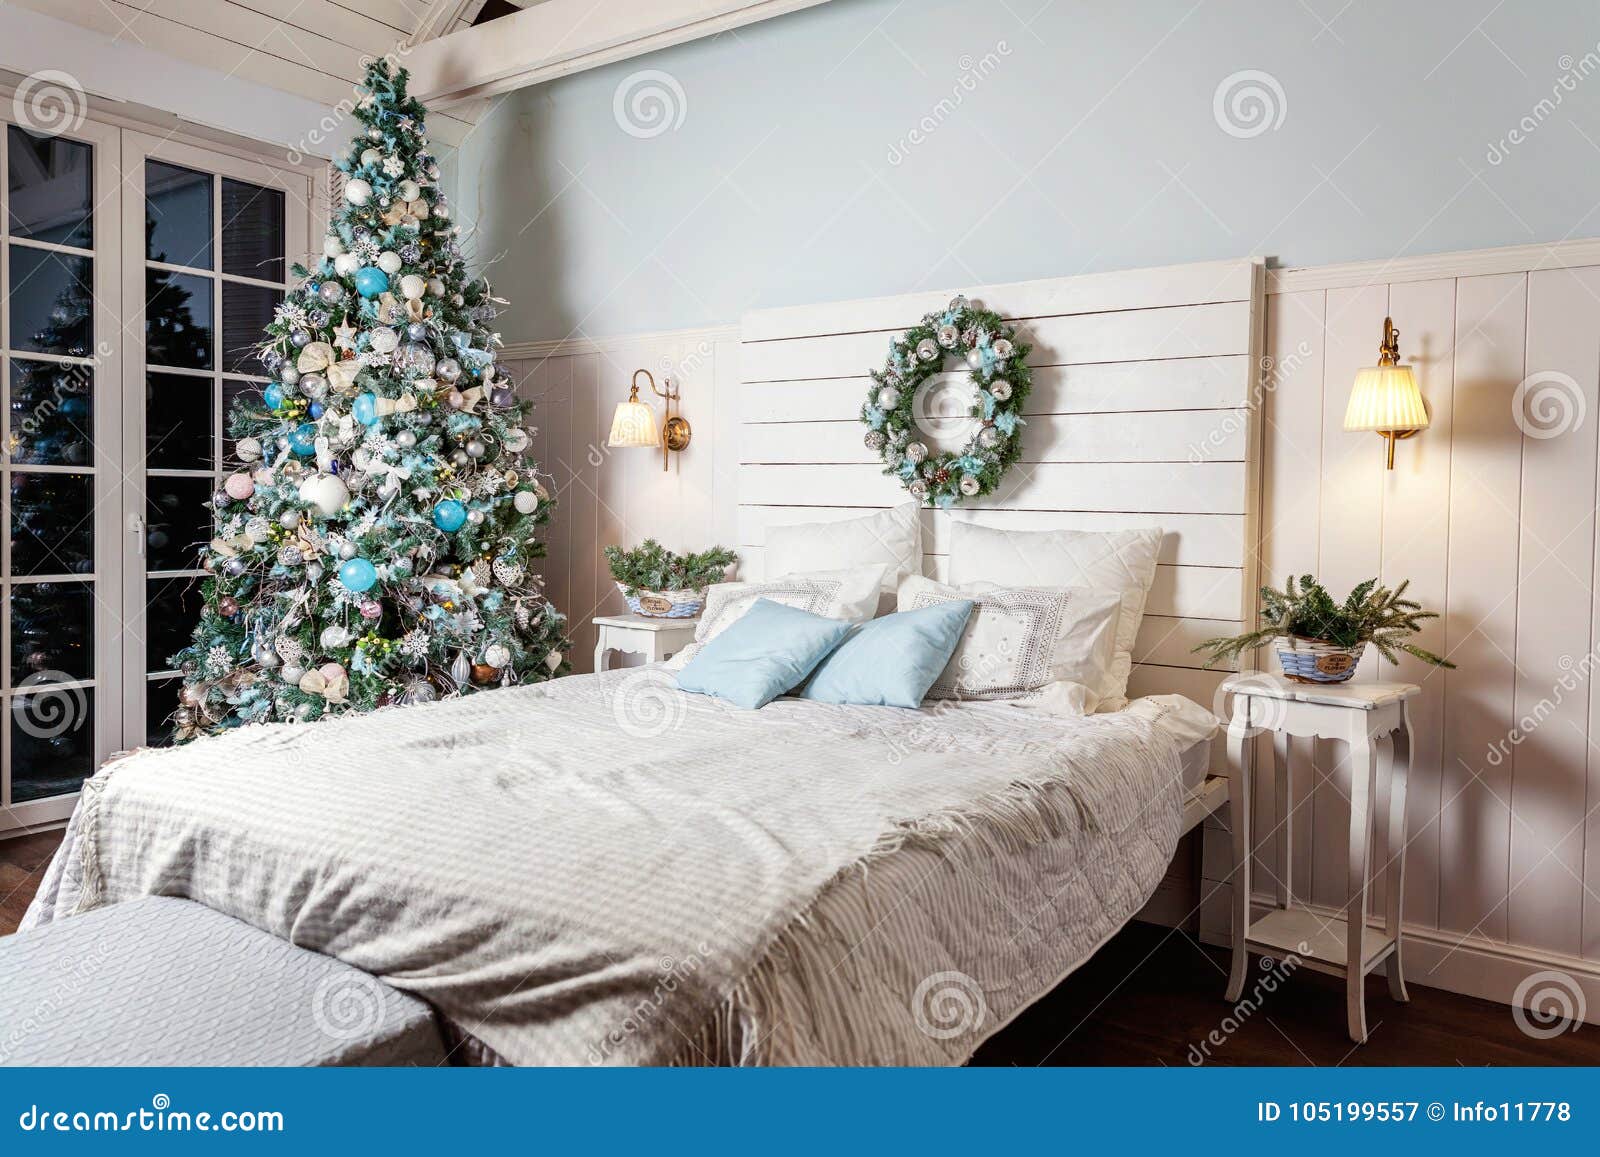 Christmas Tree With White Blue And Silver Decorations Stock